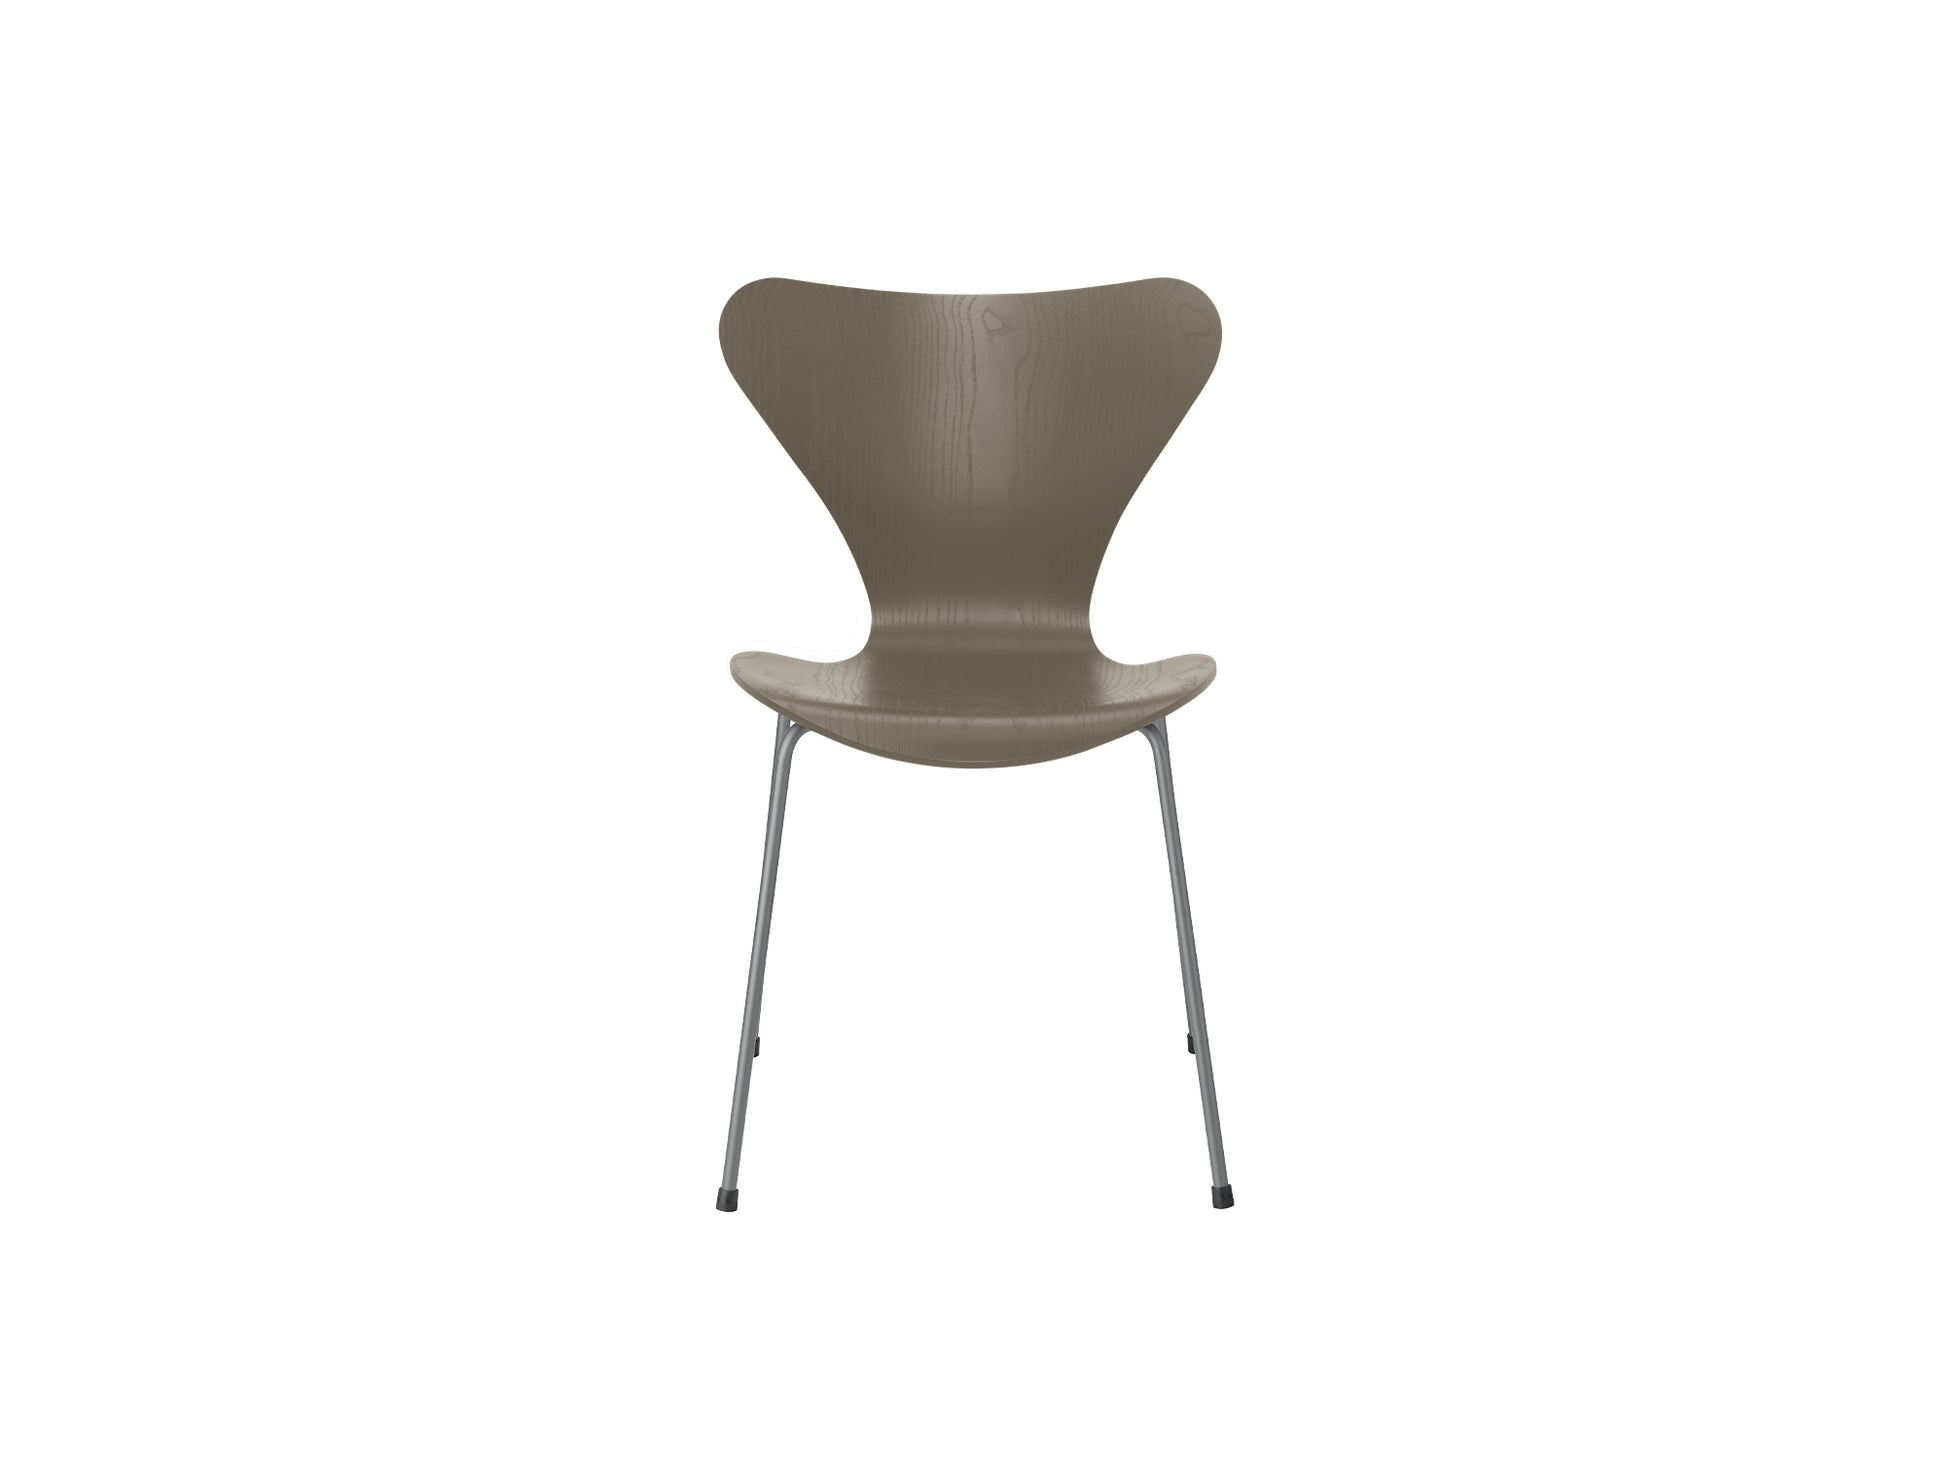 Series 7™ 3107 Dining Chair by Fritz Hansen - Olive Green Coloured Ash Veneer Shell / Silver Grey Steel